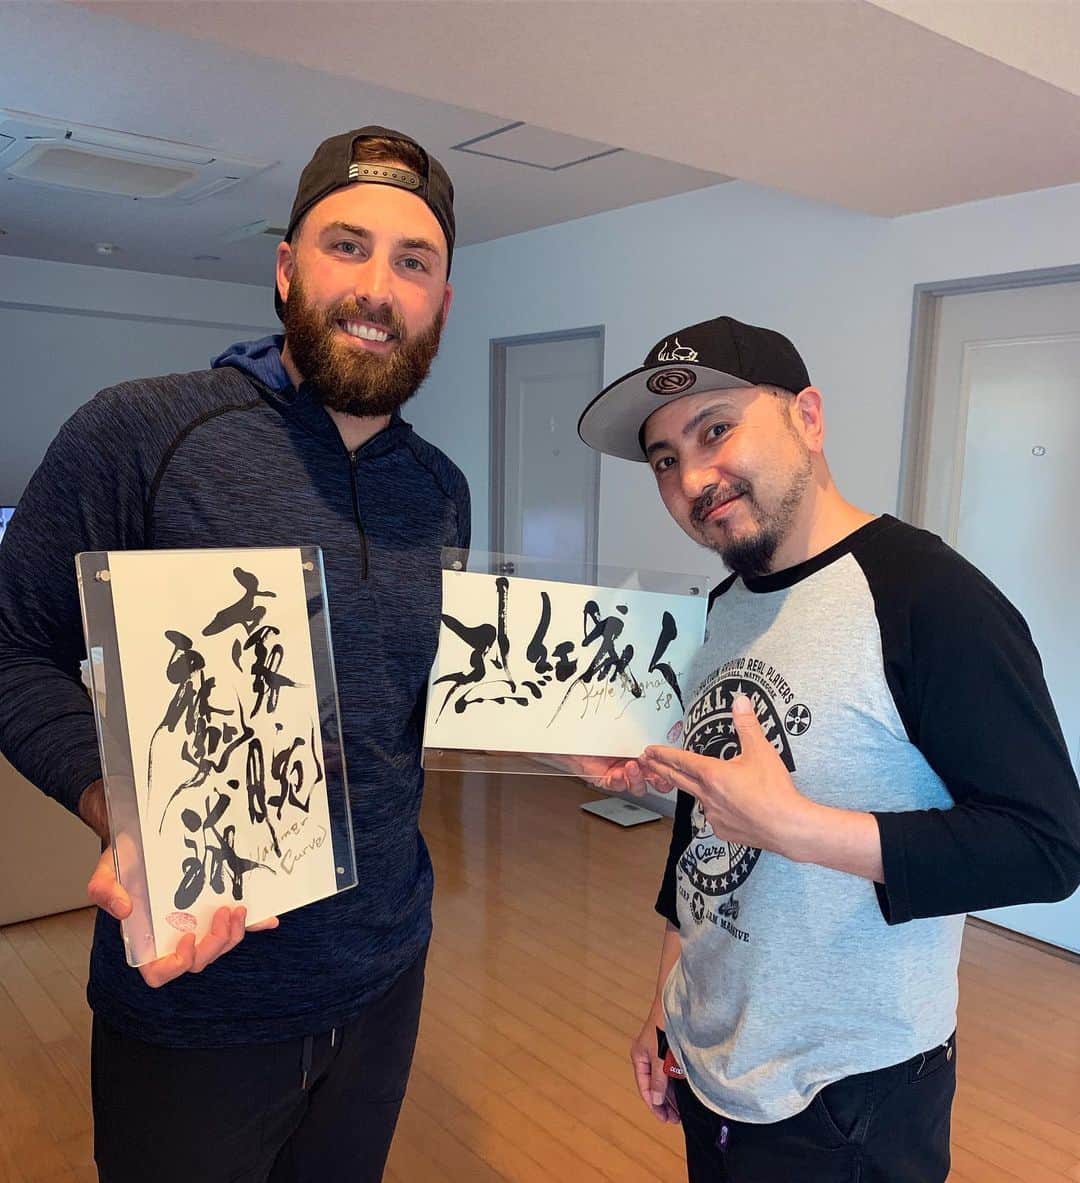 K. レグナルトのインスタグラム：「Cool stuff right here! @bigbossgwaan hooked it up with this awesome Kanji! Arigato boss man!」